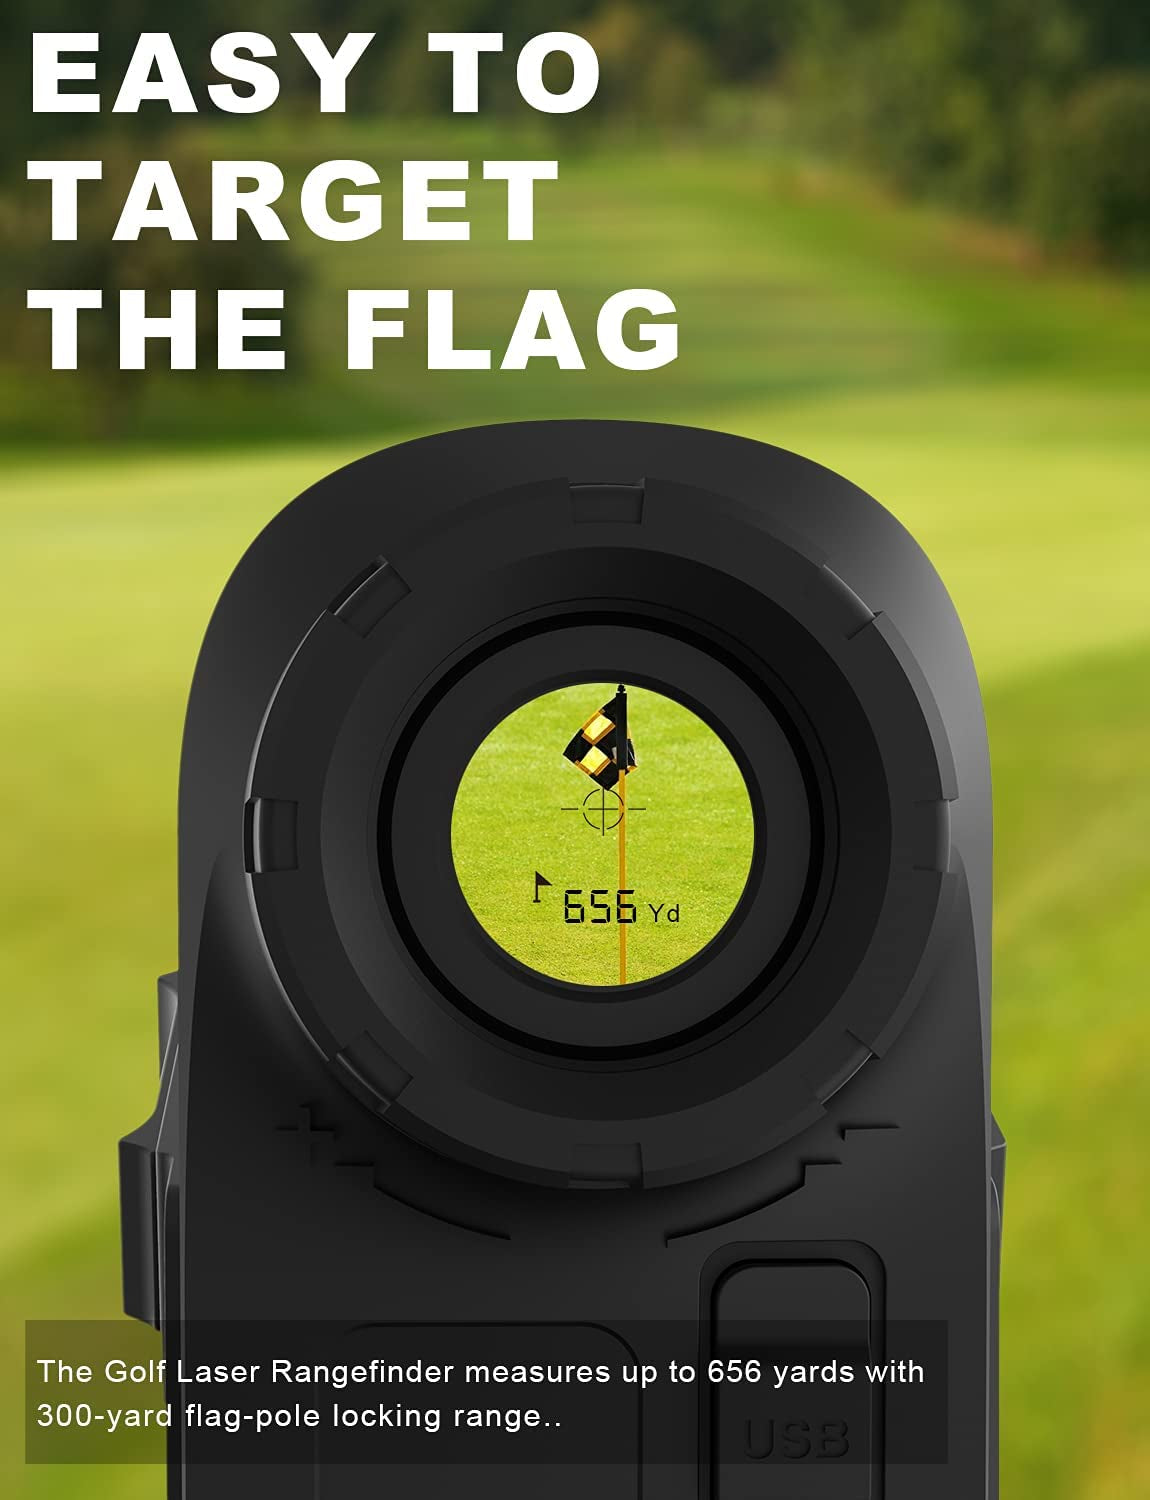 Rechargeable Golf Range Finder with Slope, Mileseey Pf280Pro 656Yard Range Finder with Precise Flag Pole Lock, 6X Magnification, Golf Scanning, Distance/Speed Measurement for Hunting/Golf